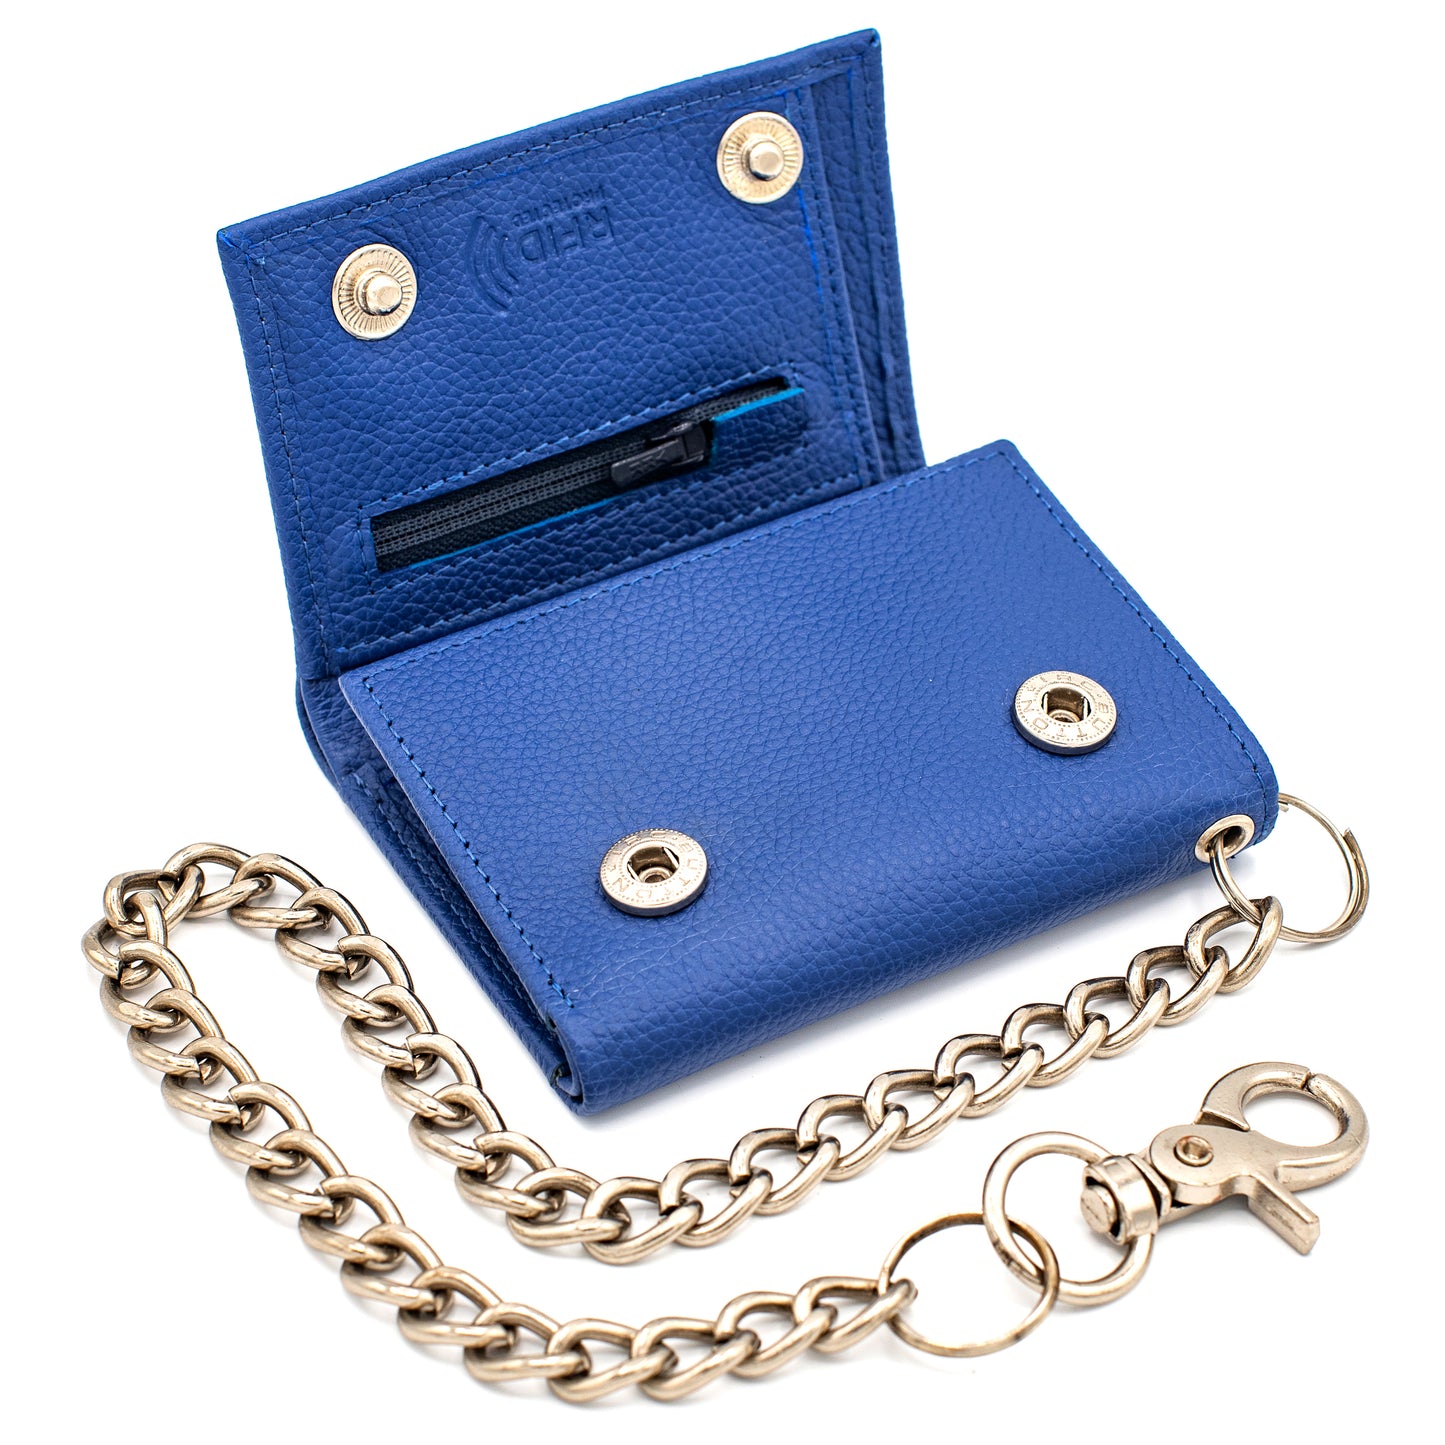 Trifold Chain Wallet with Snaps RFID Leather Wallet